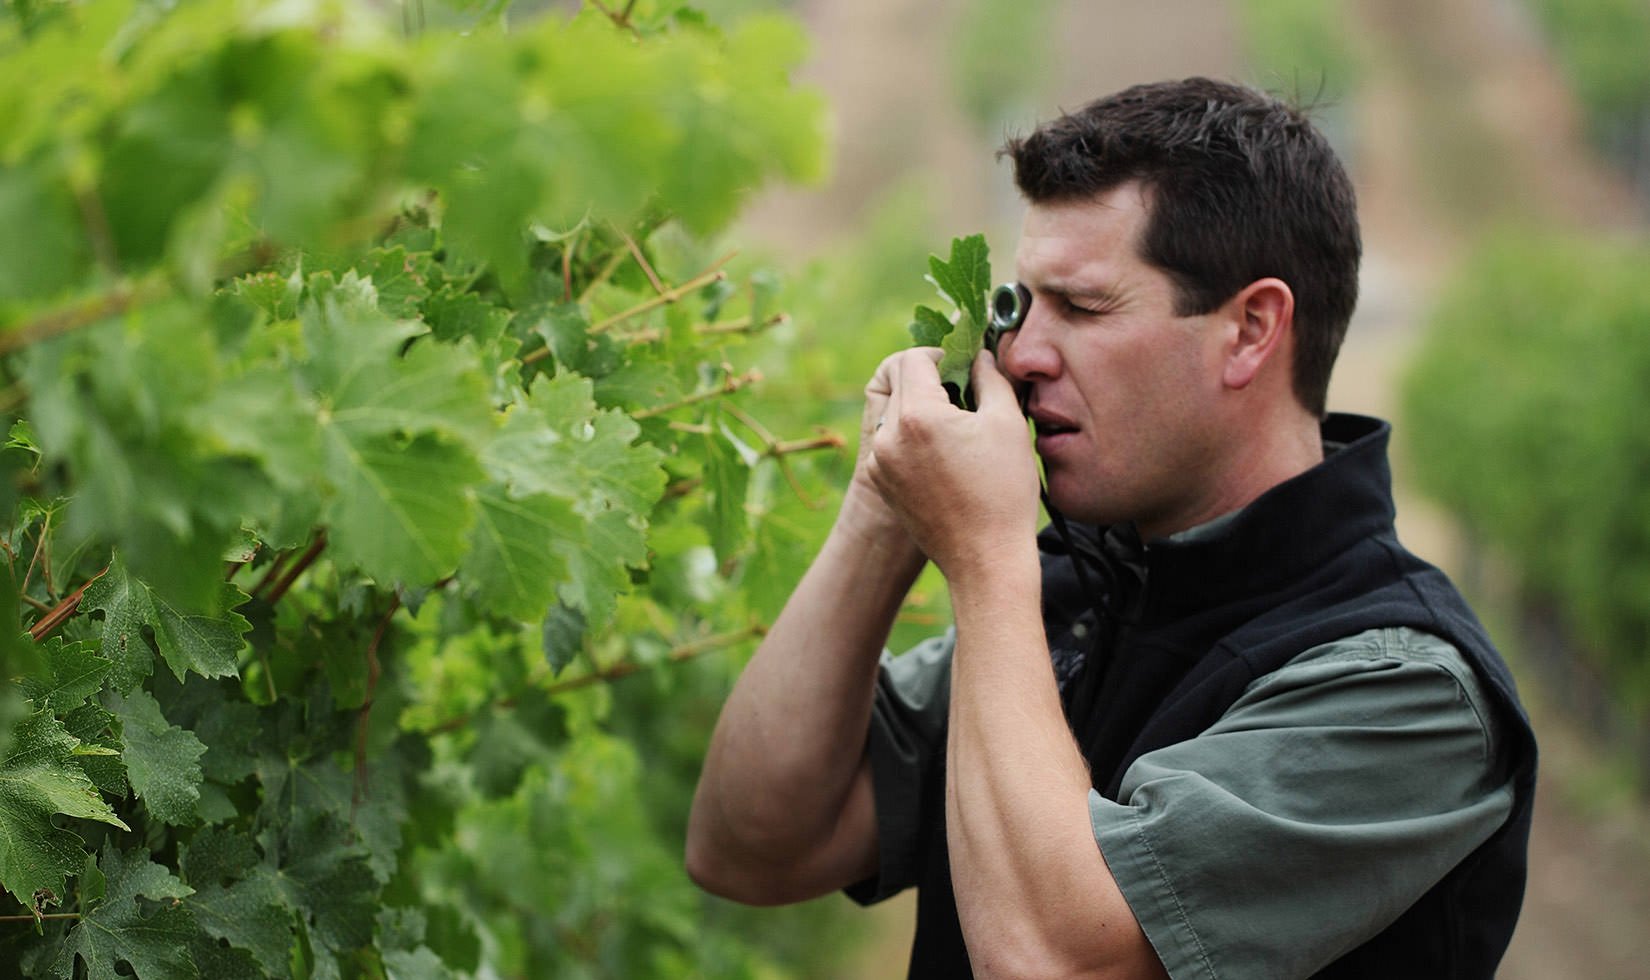 Brent Young, Director of agriculture at Jordan Winery inspecting vines in a vineyard